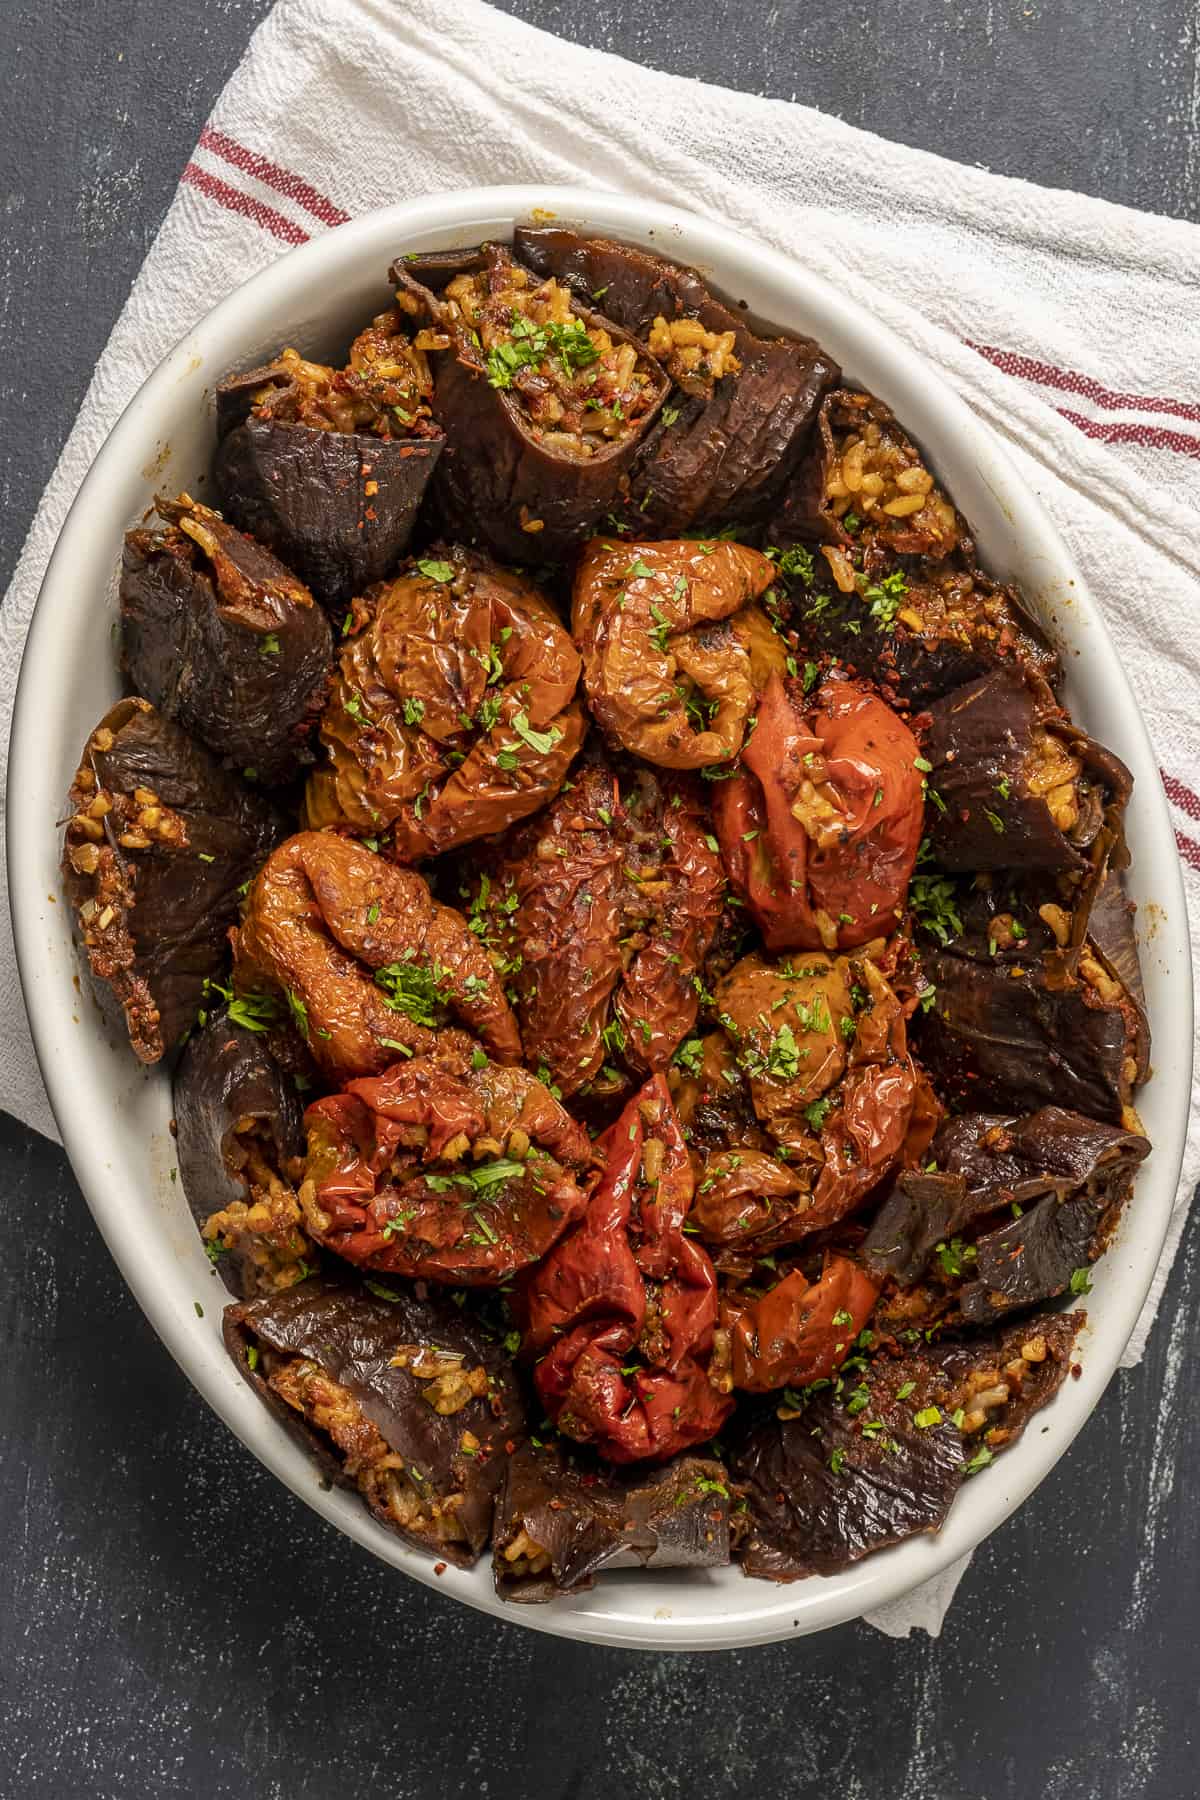 Stuffed dried eggplants and peppers in a white oval baking pan on a white linen.